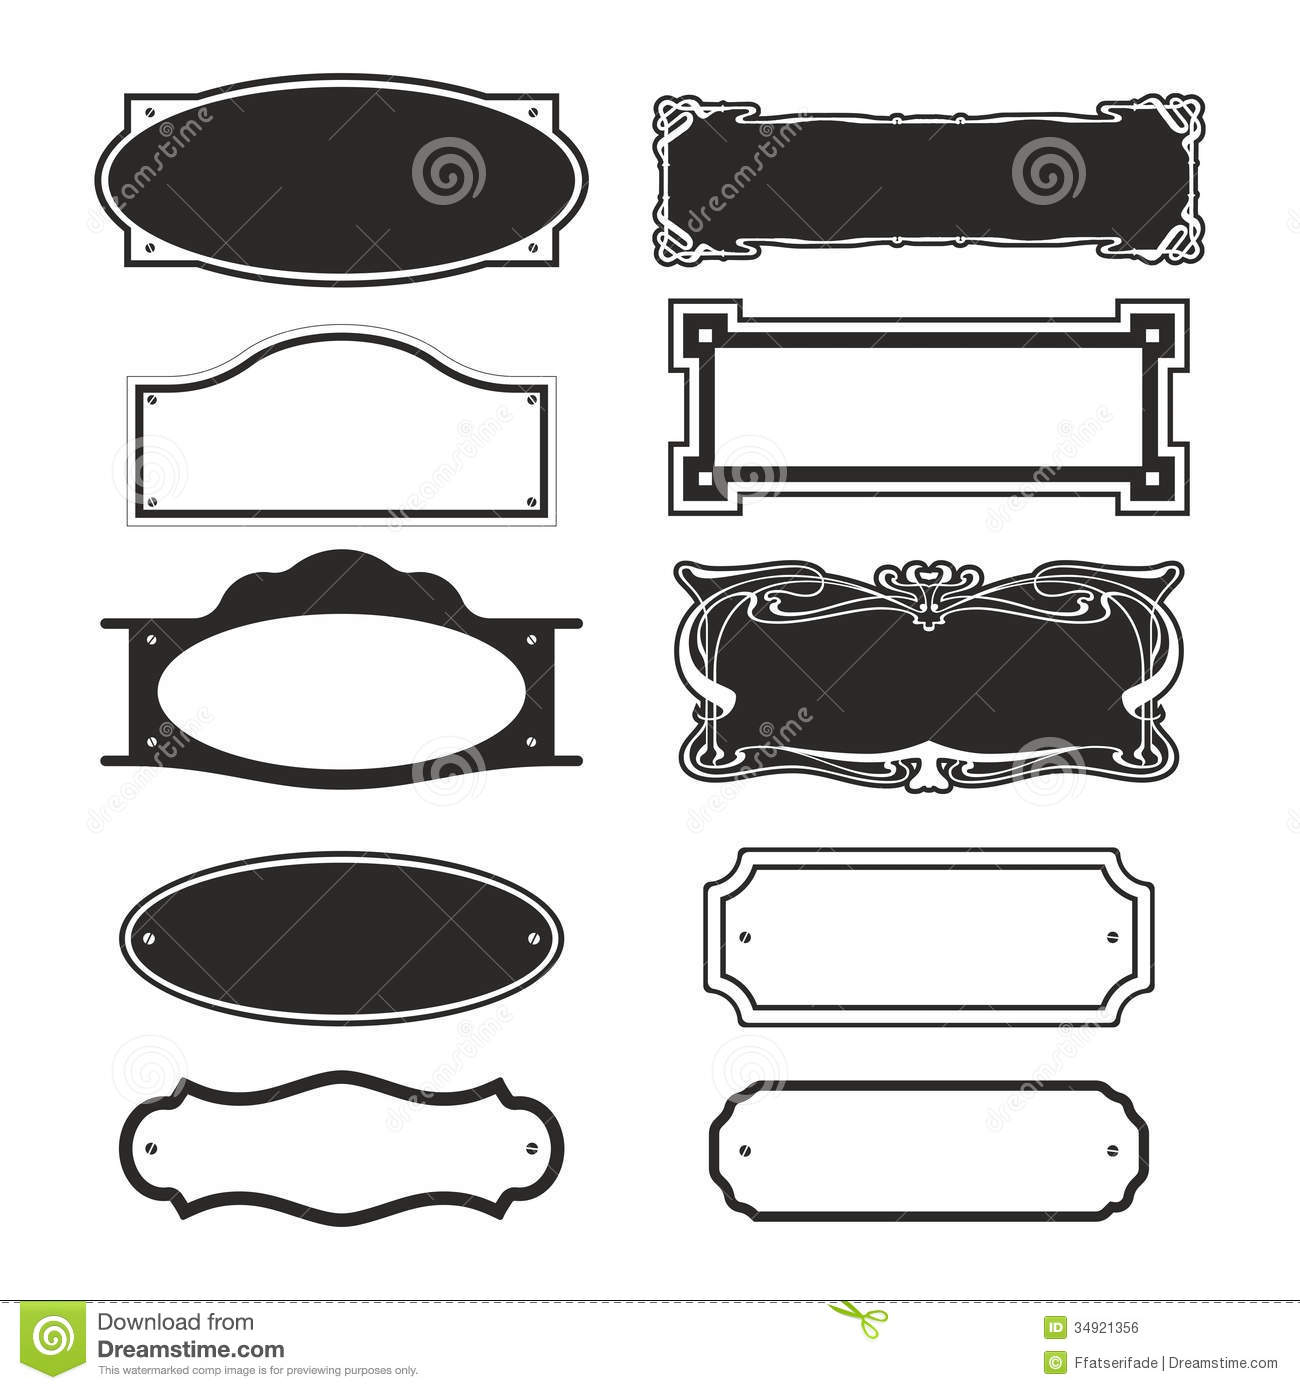 Abstract Illustration Of Different Doorbell Name Plates